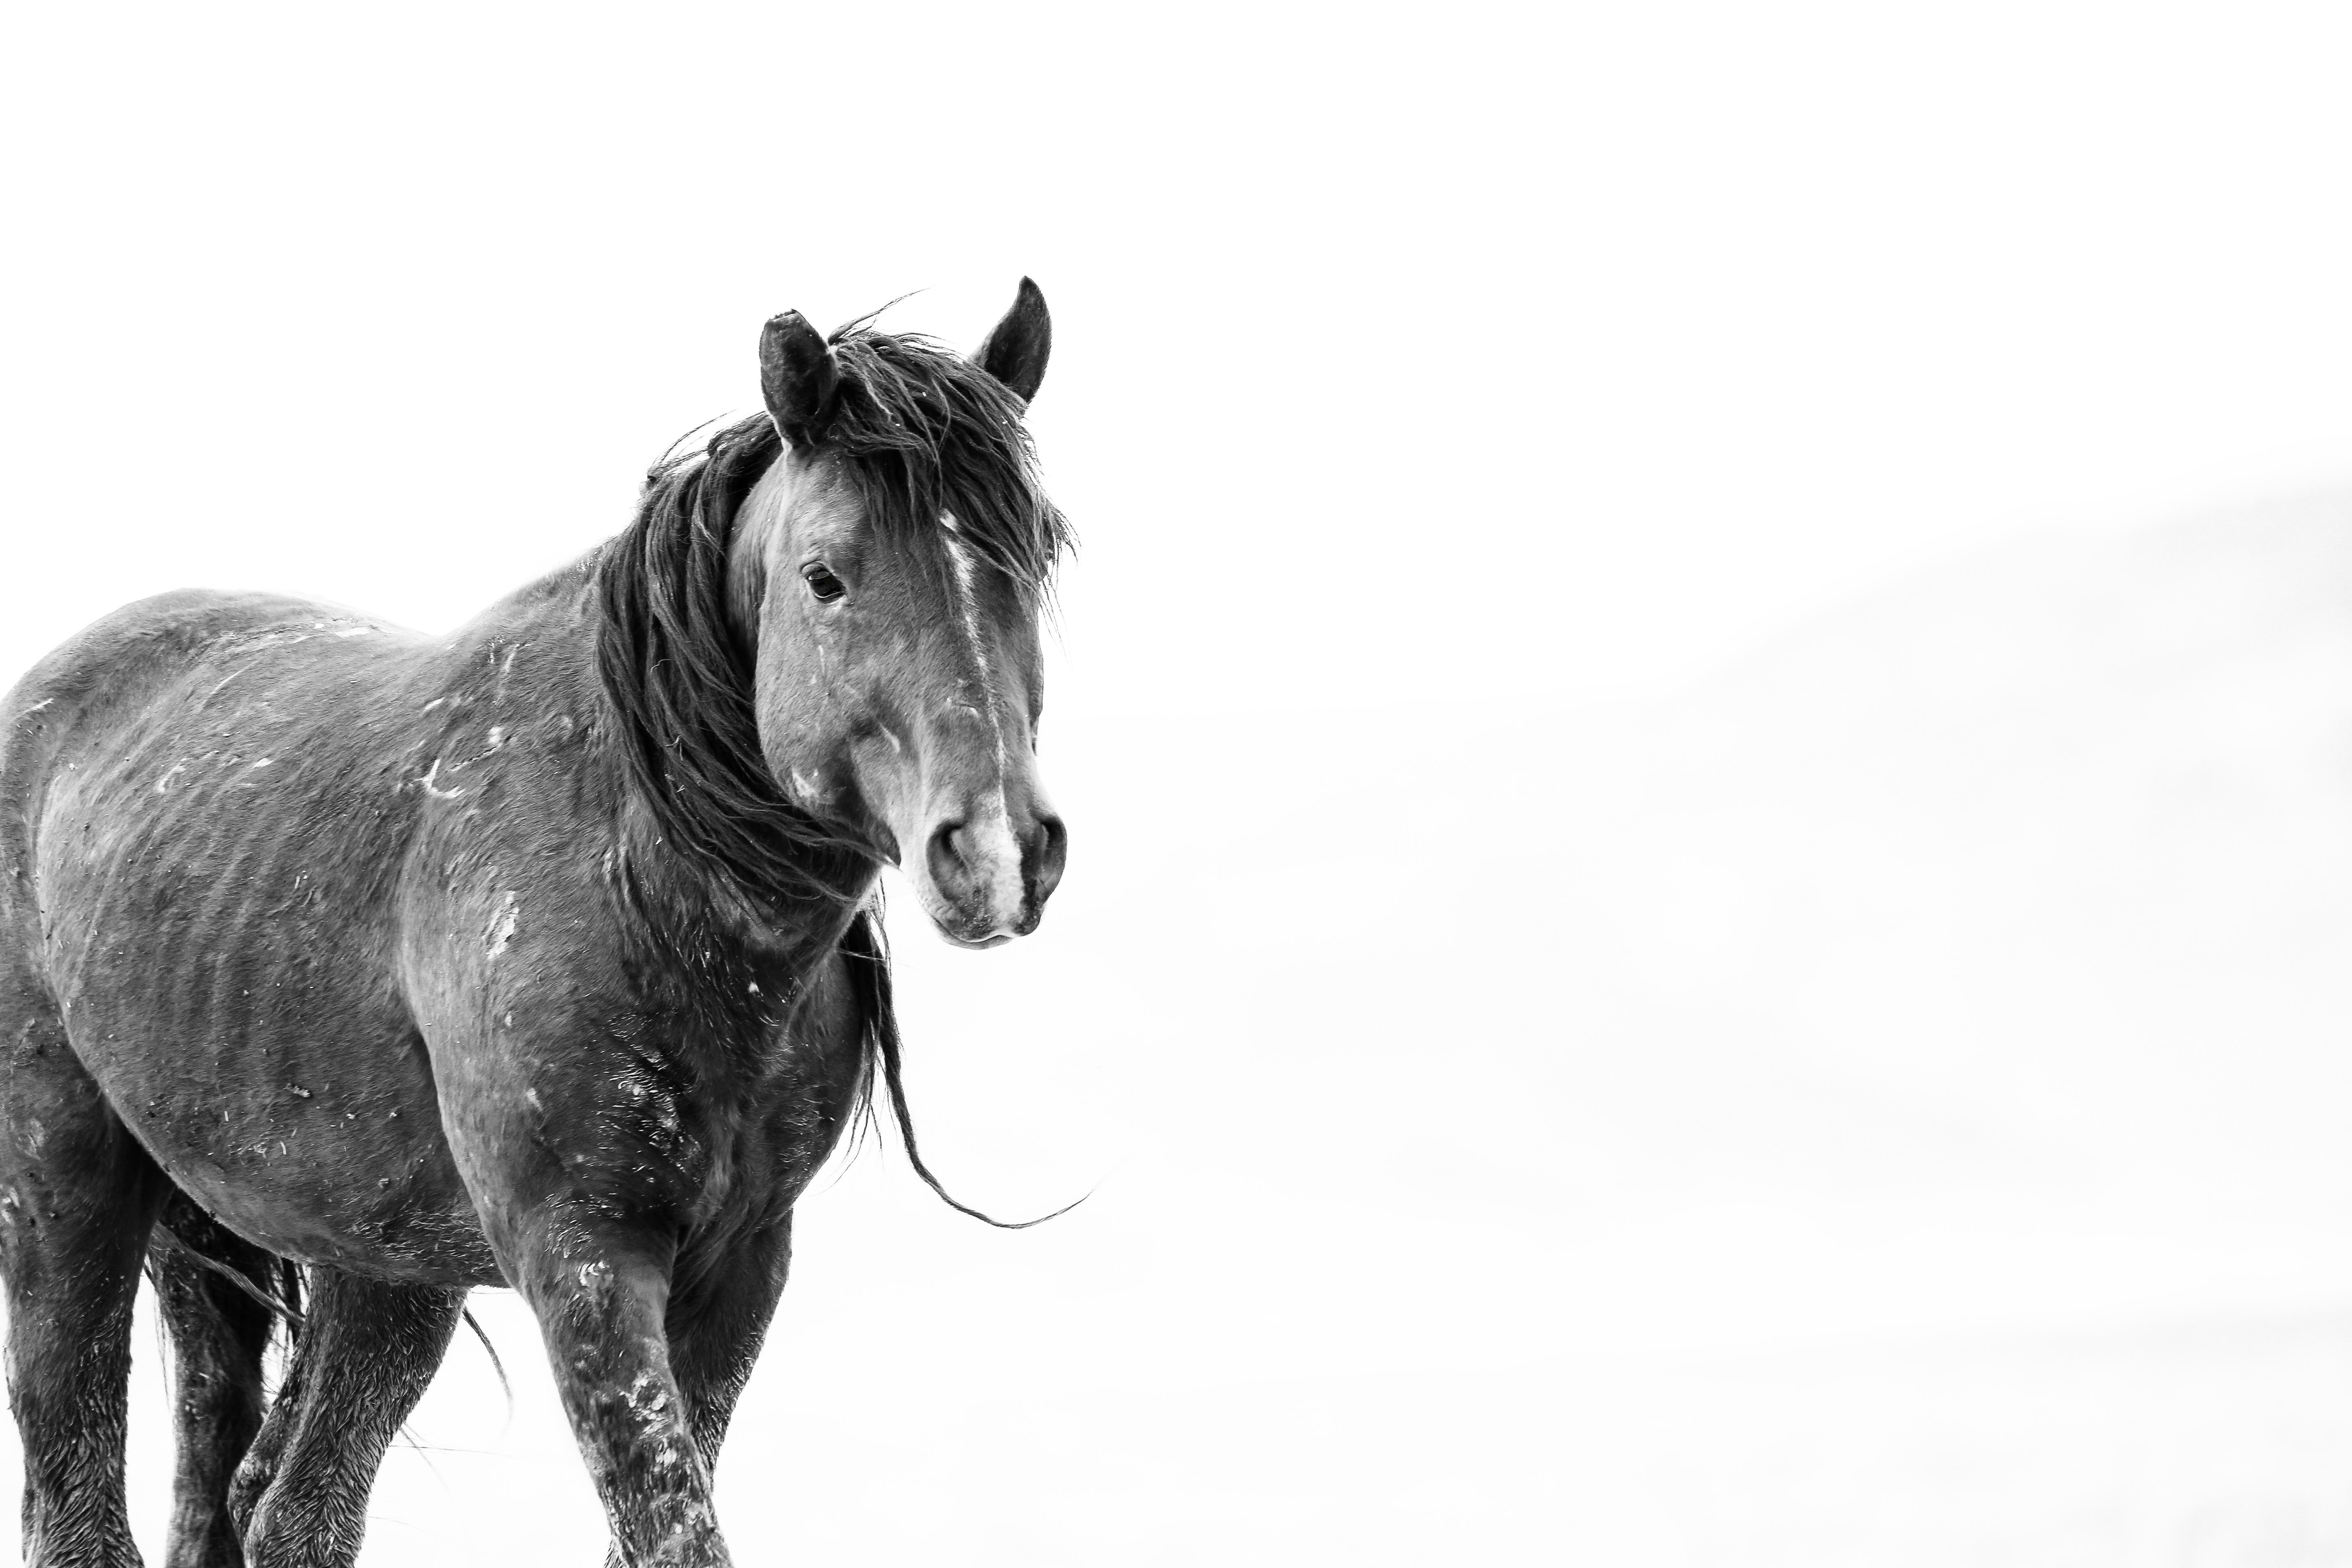 SOLO 36x48  Black & White Photography, Wild Horses Mustang Photograph ART